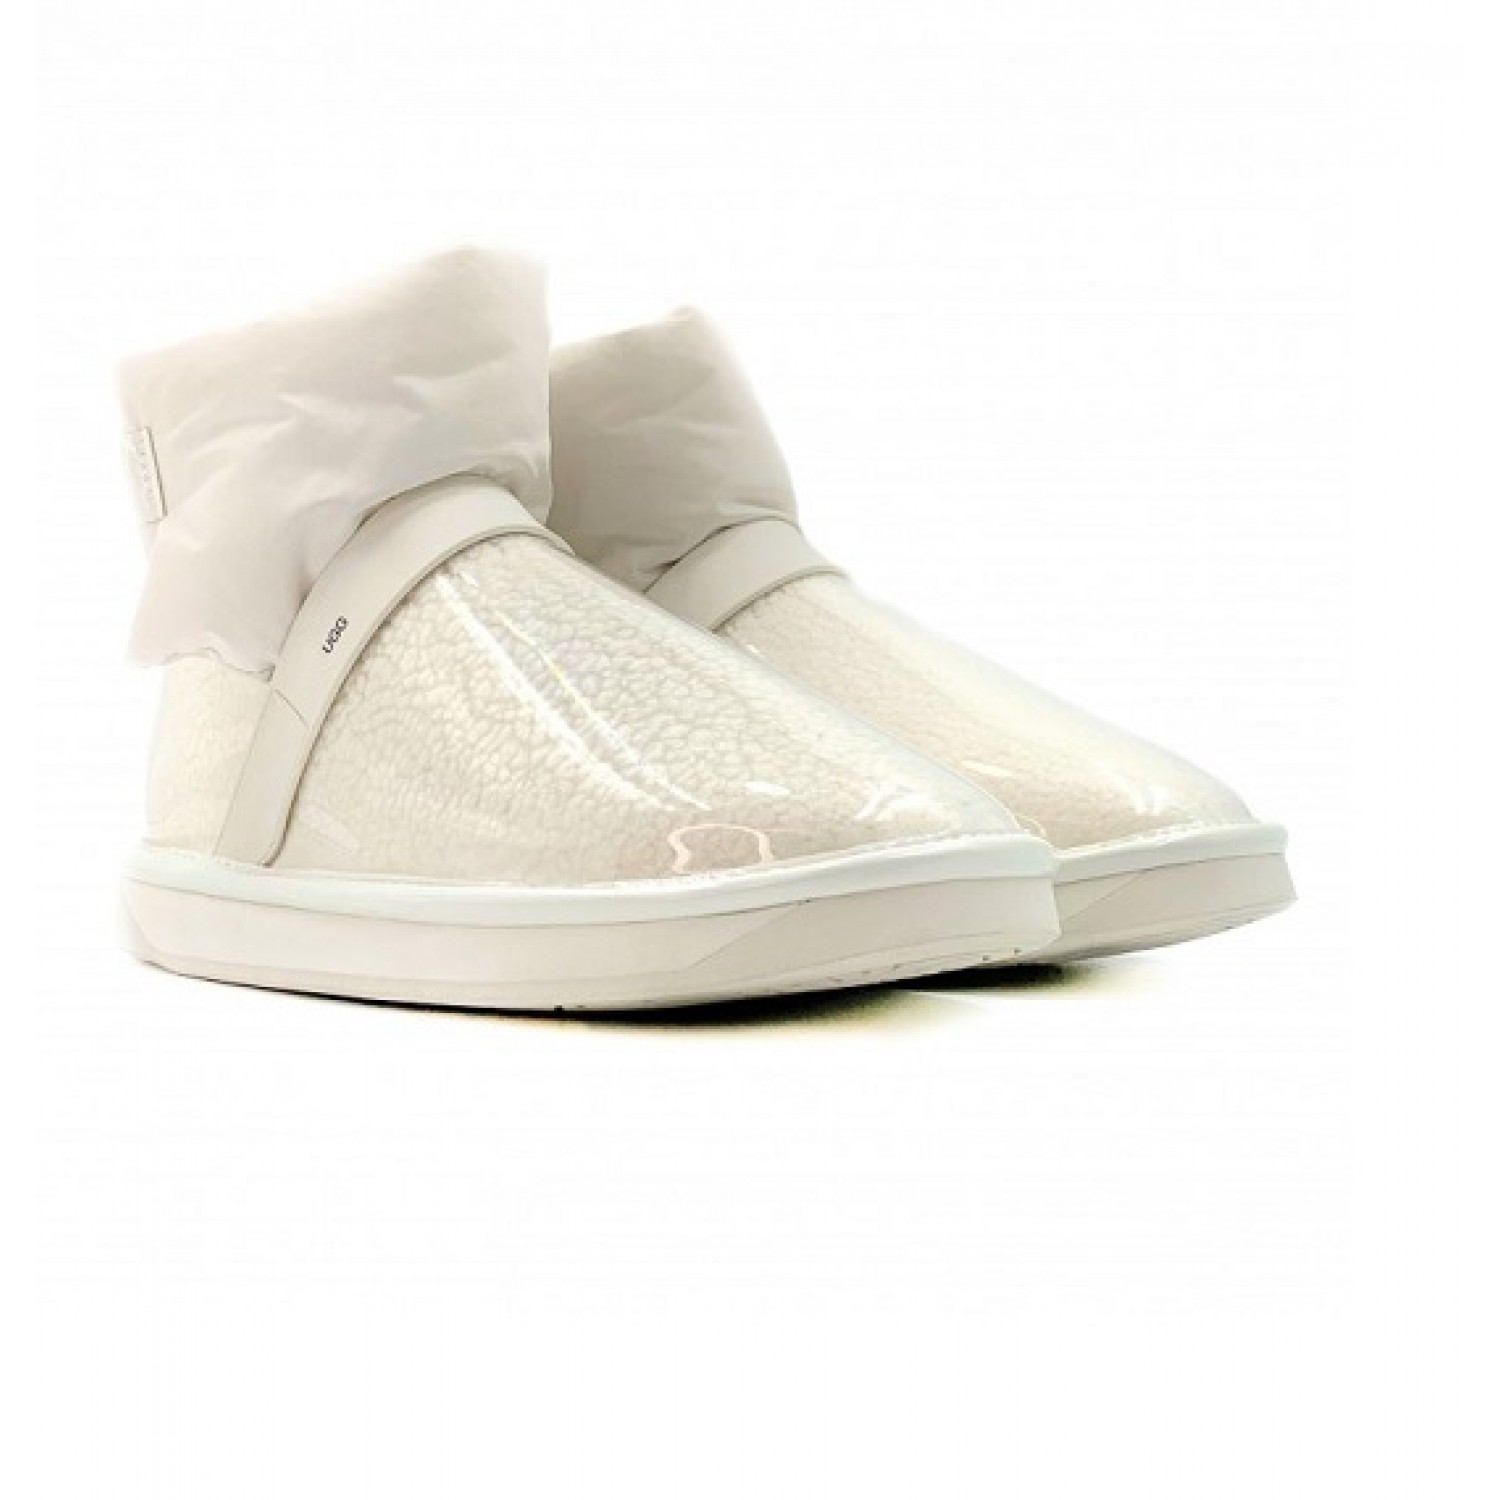 Clear Quilty Boots Mini - White